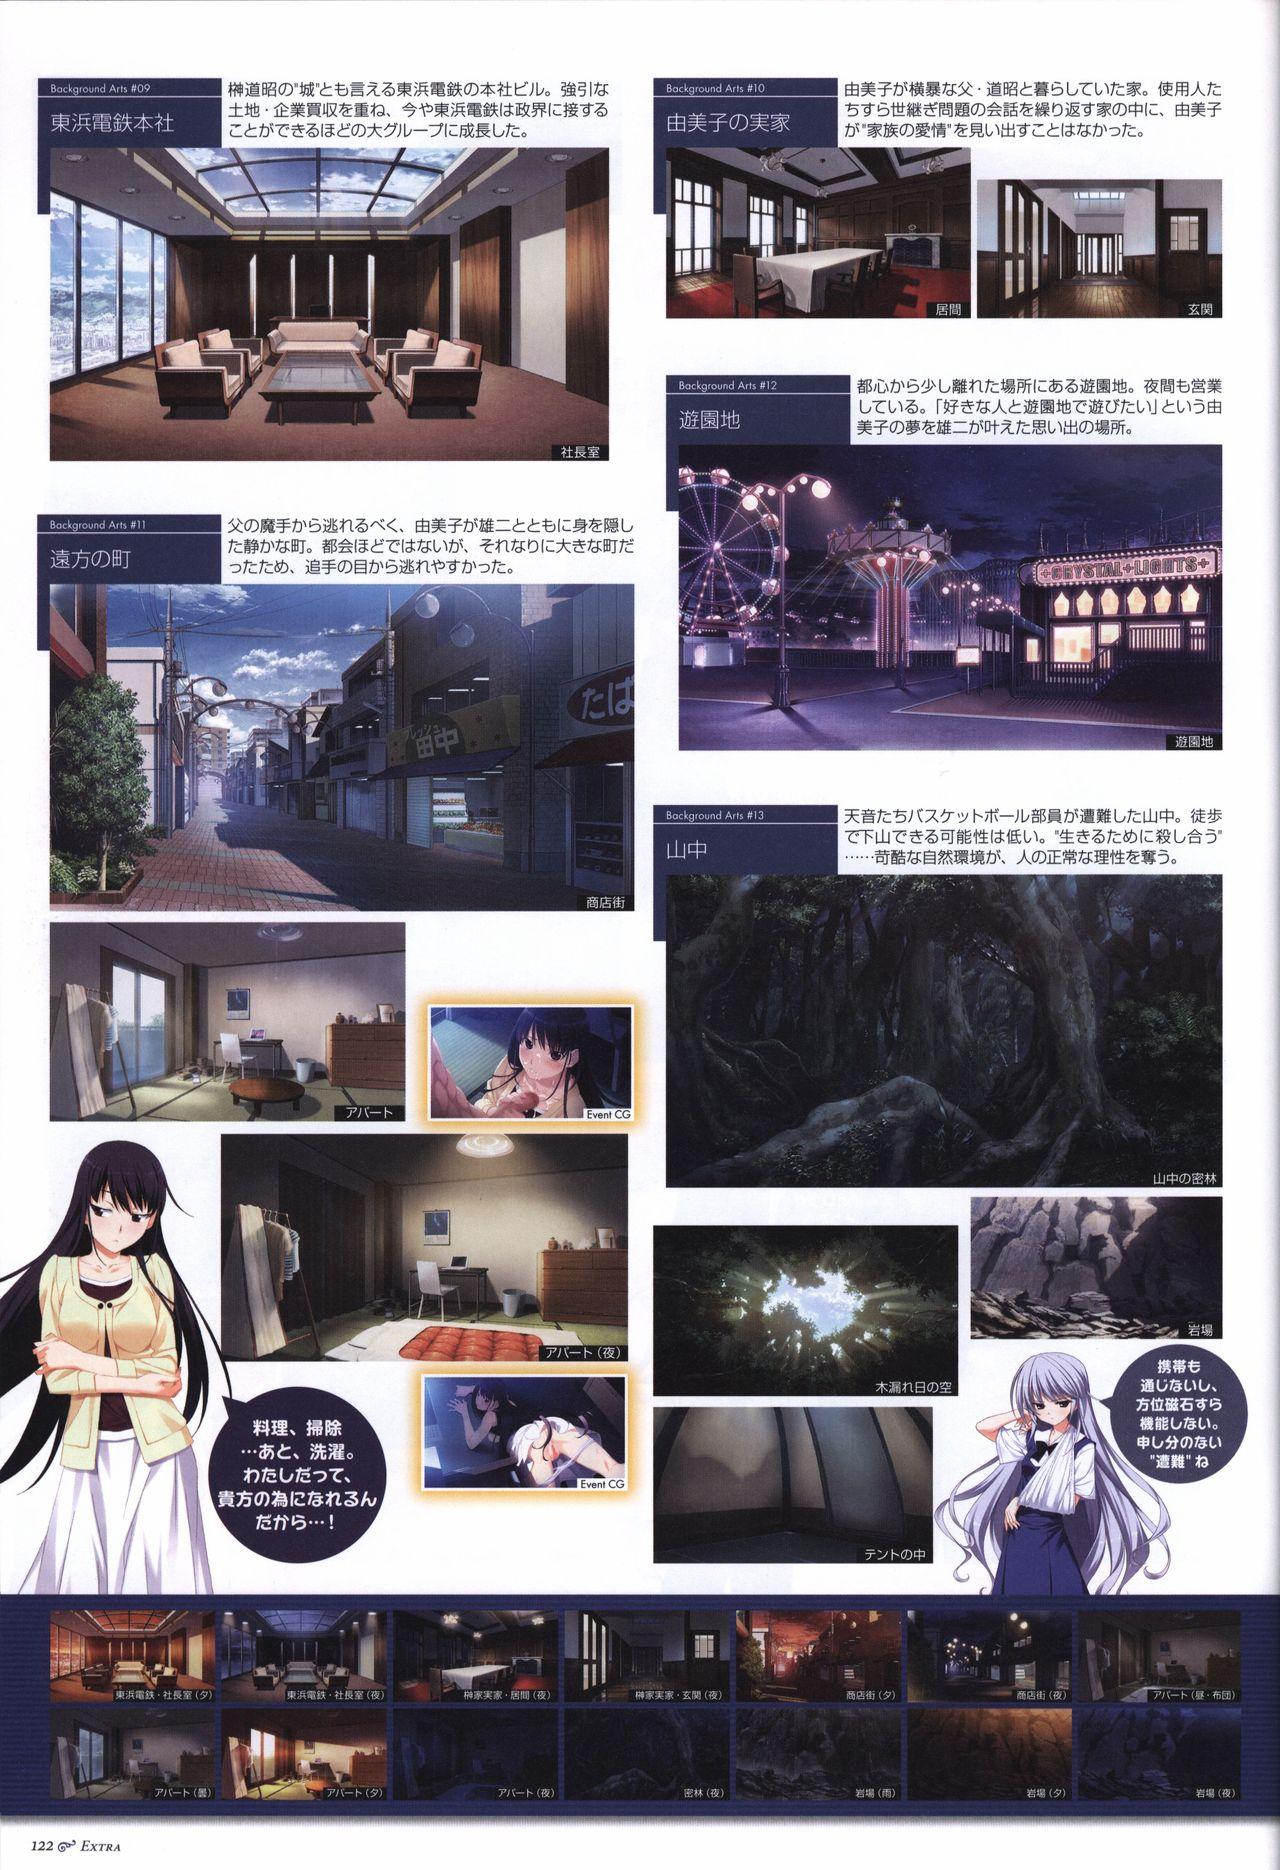 The Fruit of Grisaia Visual FanBook 122